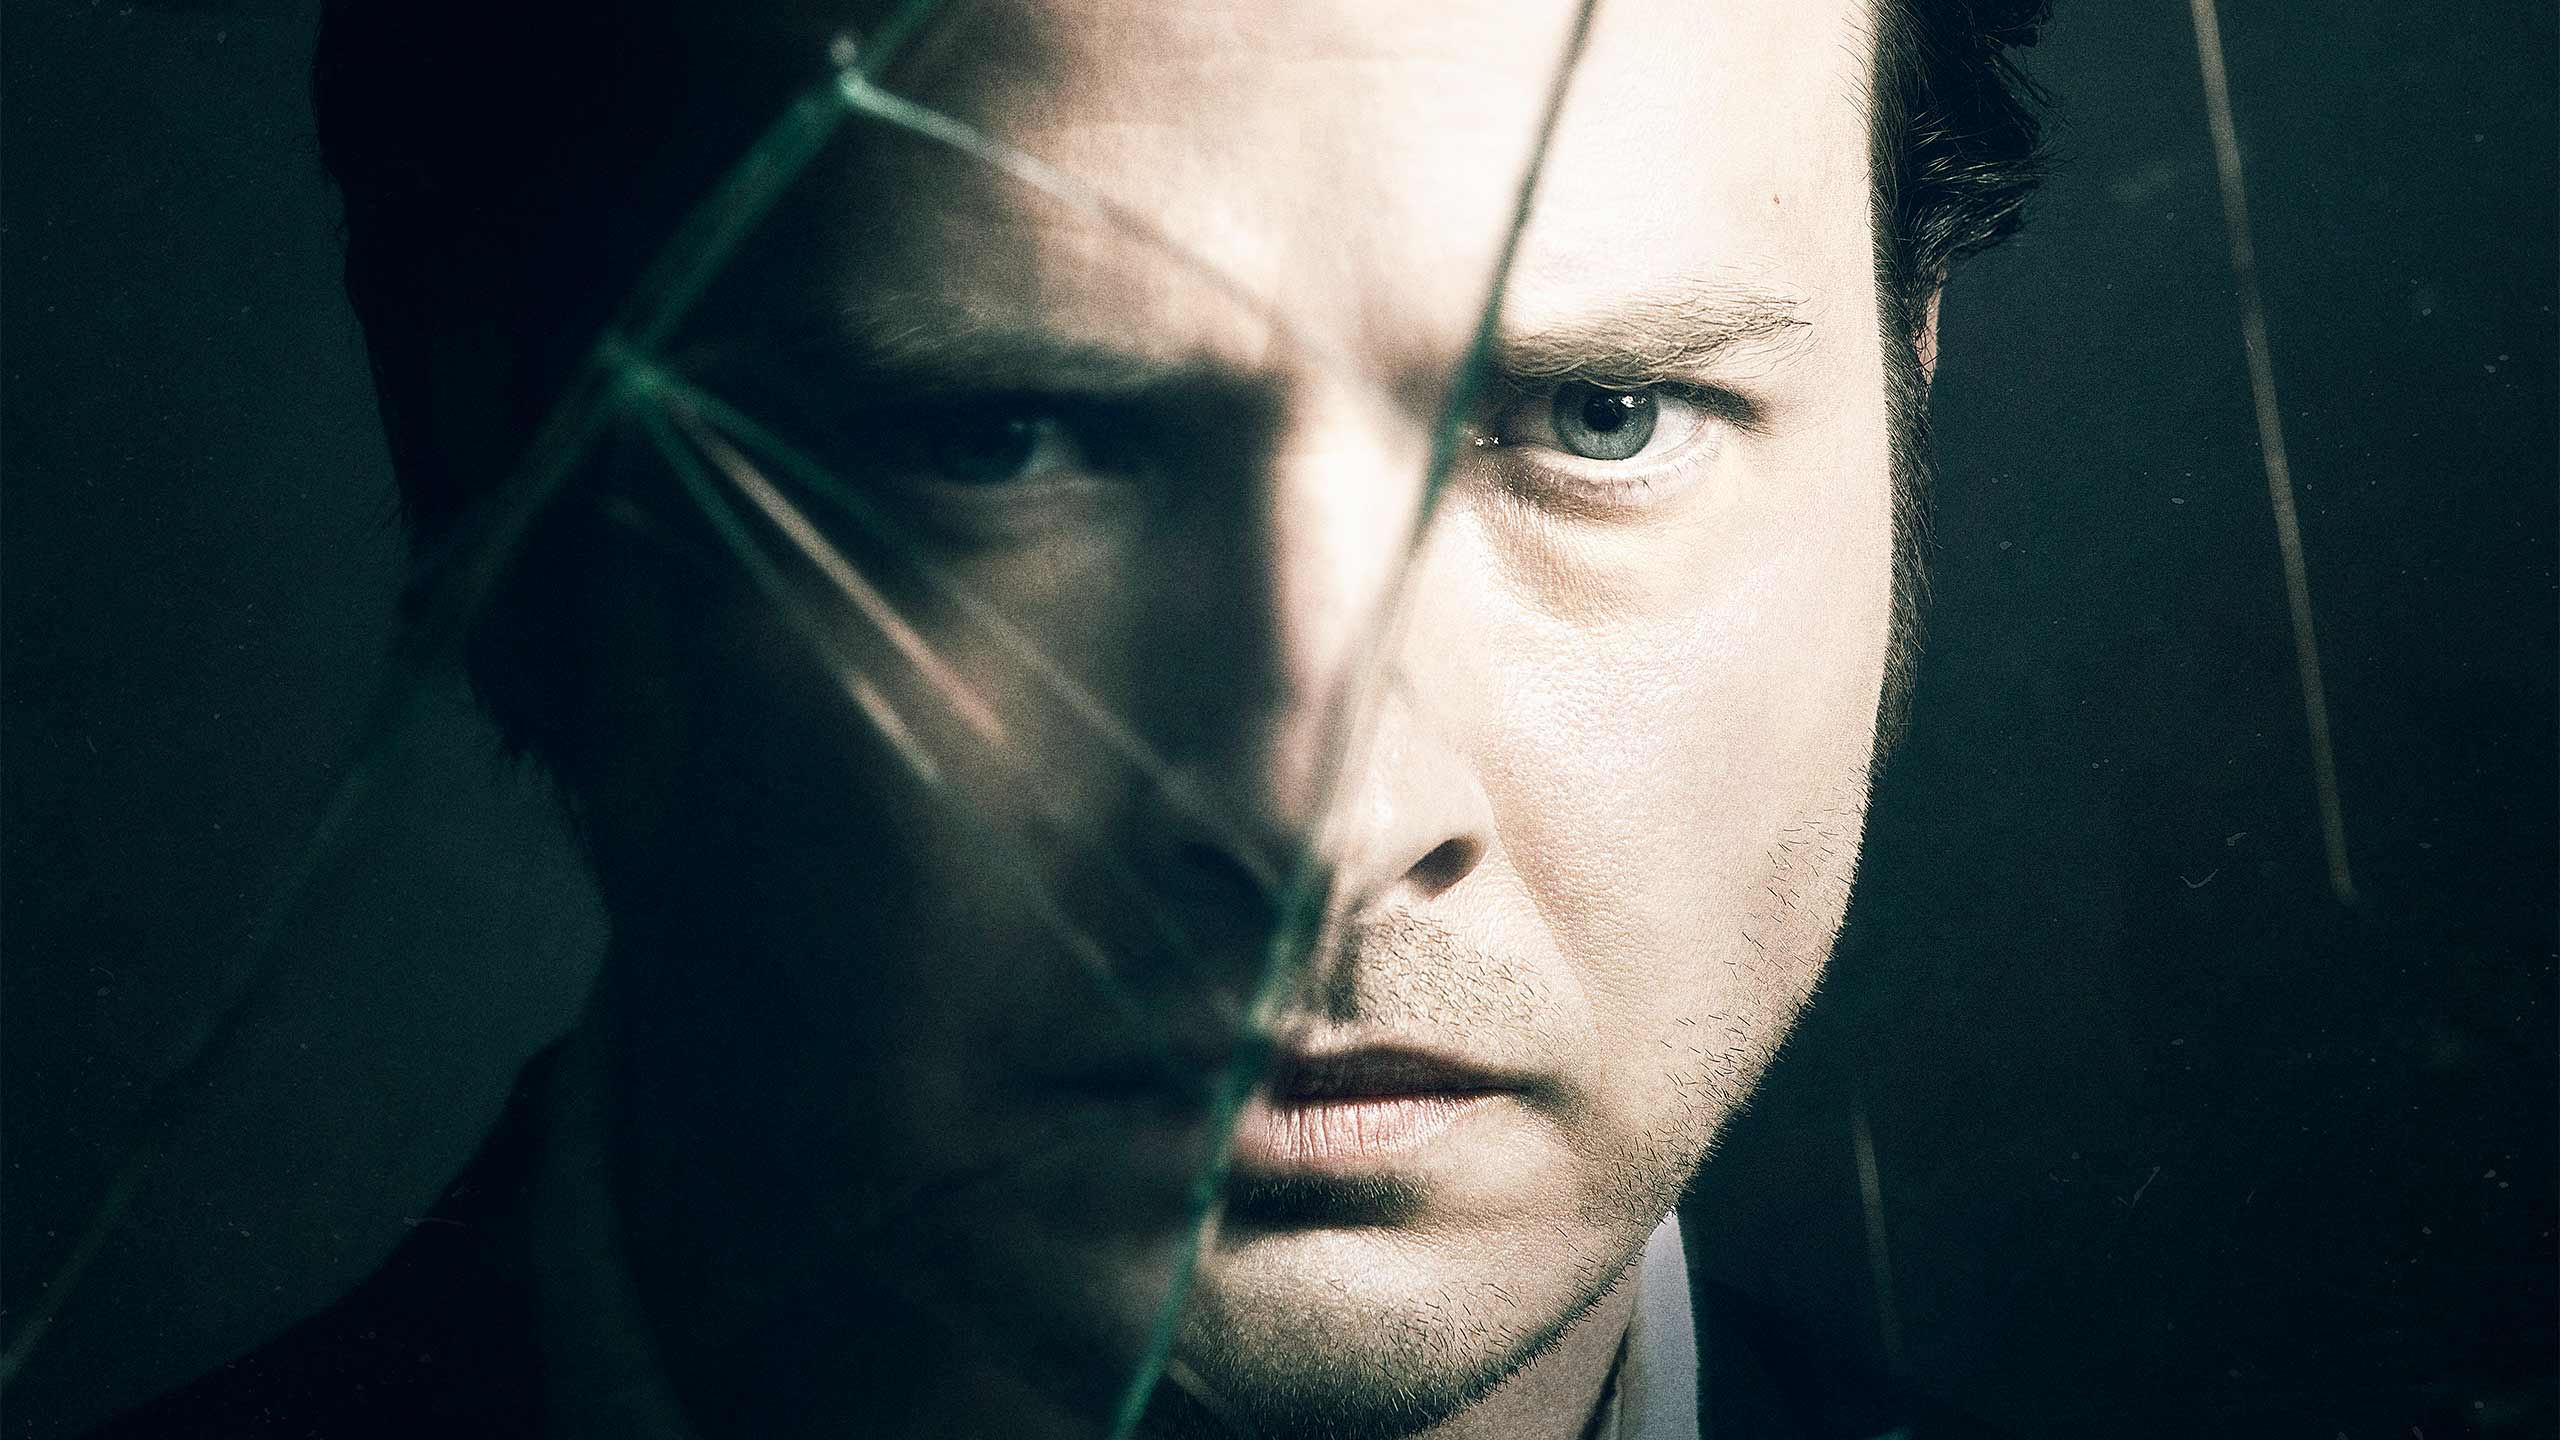 Rectify Trailer, From the producers of Breaking Bad. Daniel Holden is freed after 19 years on death row. As he adapts to life outside, anger is reignited in the small town to which he returns. Daniel Holden may be free, but the battle for his life is far from over. 